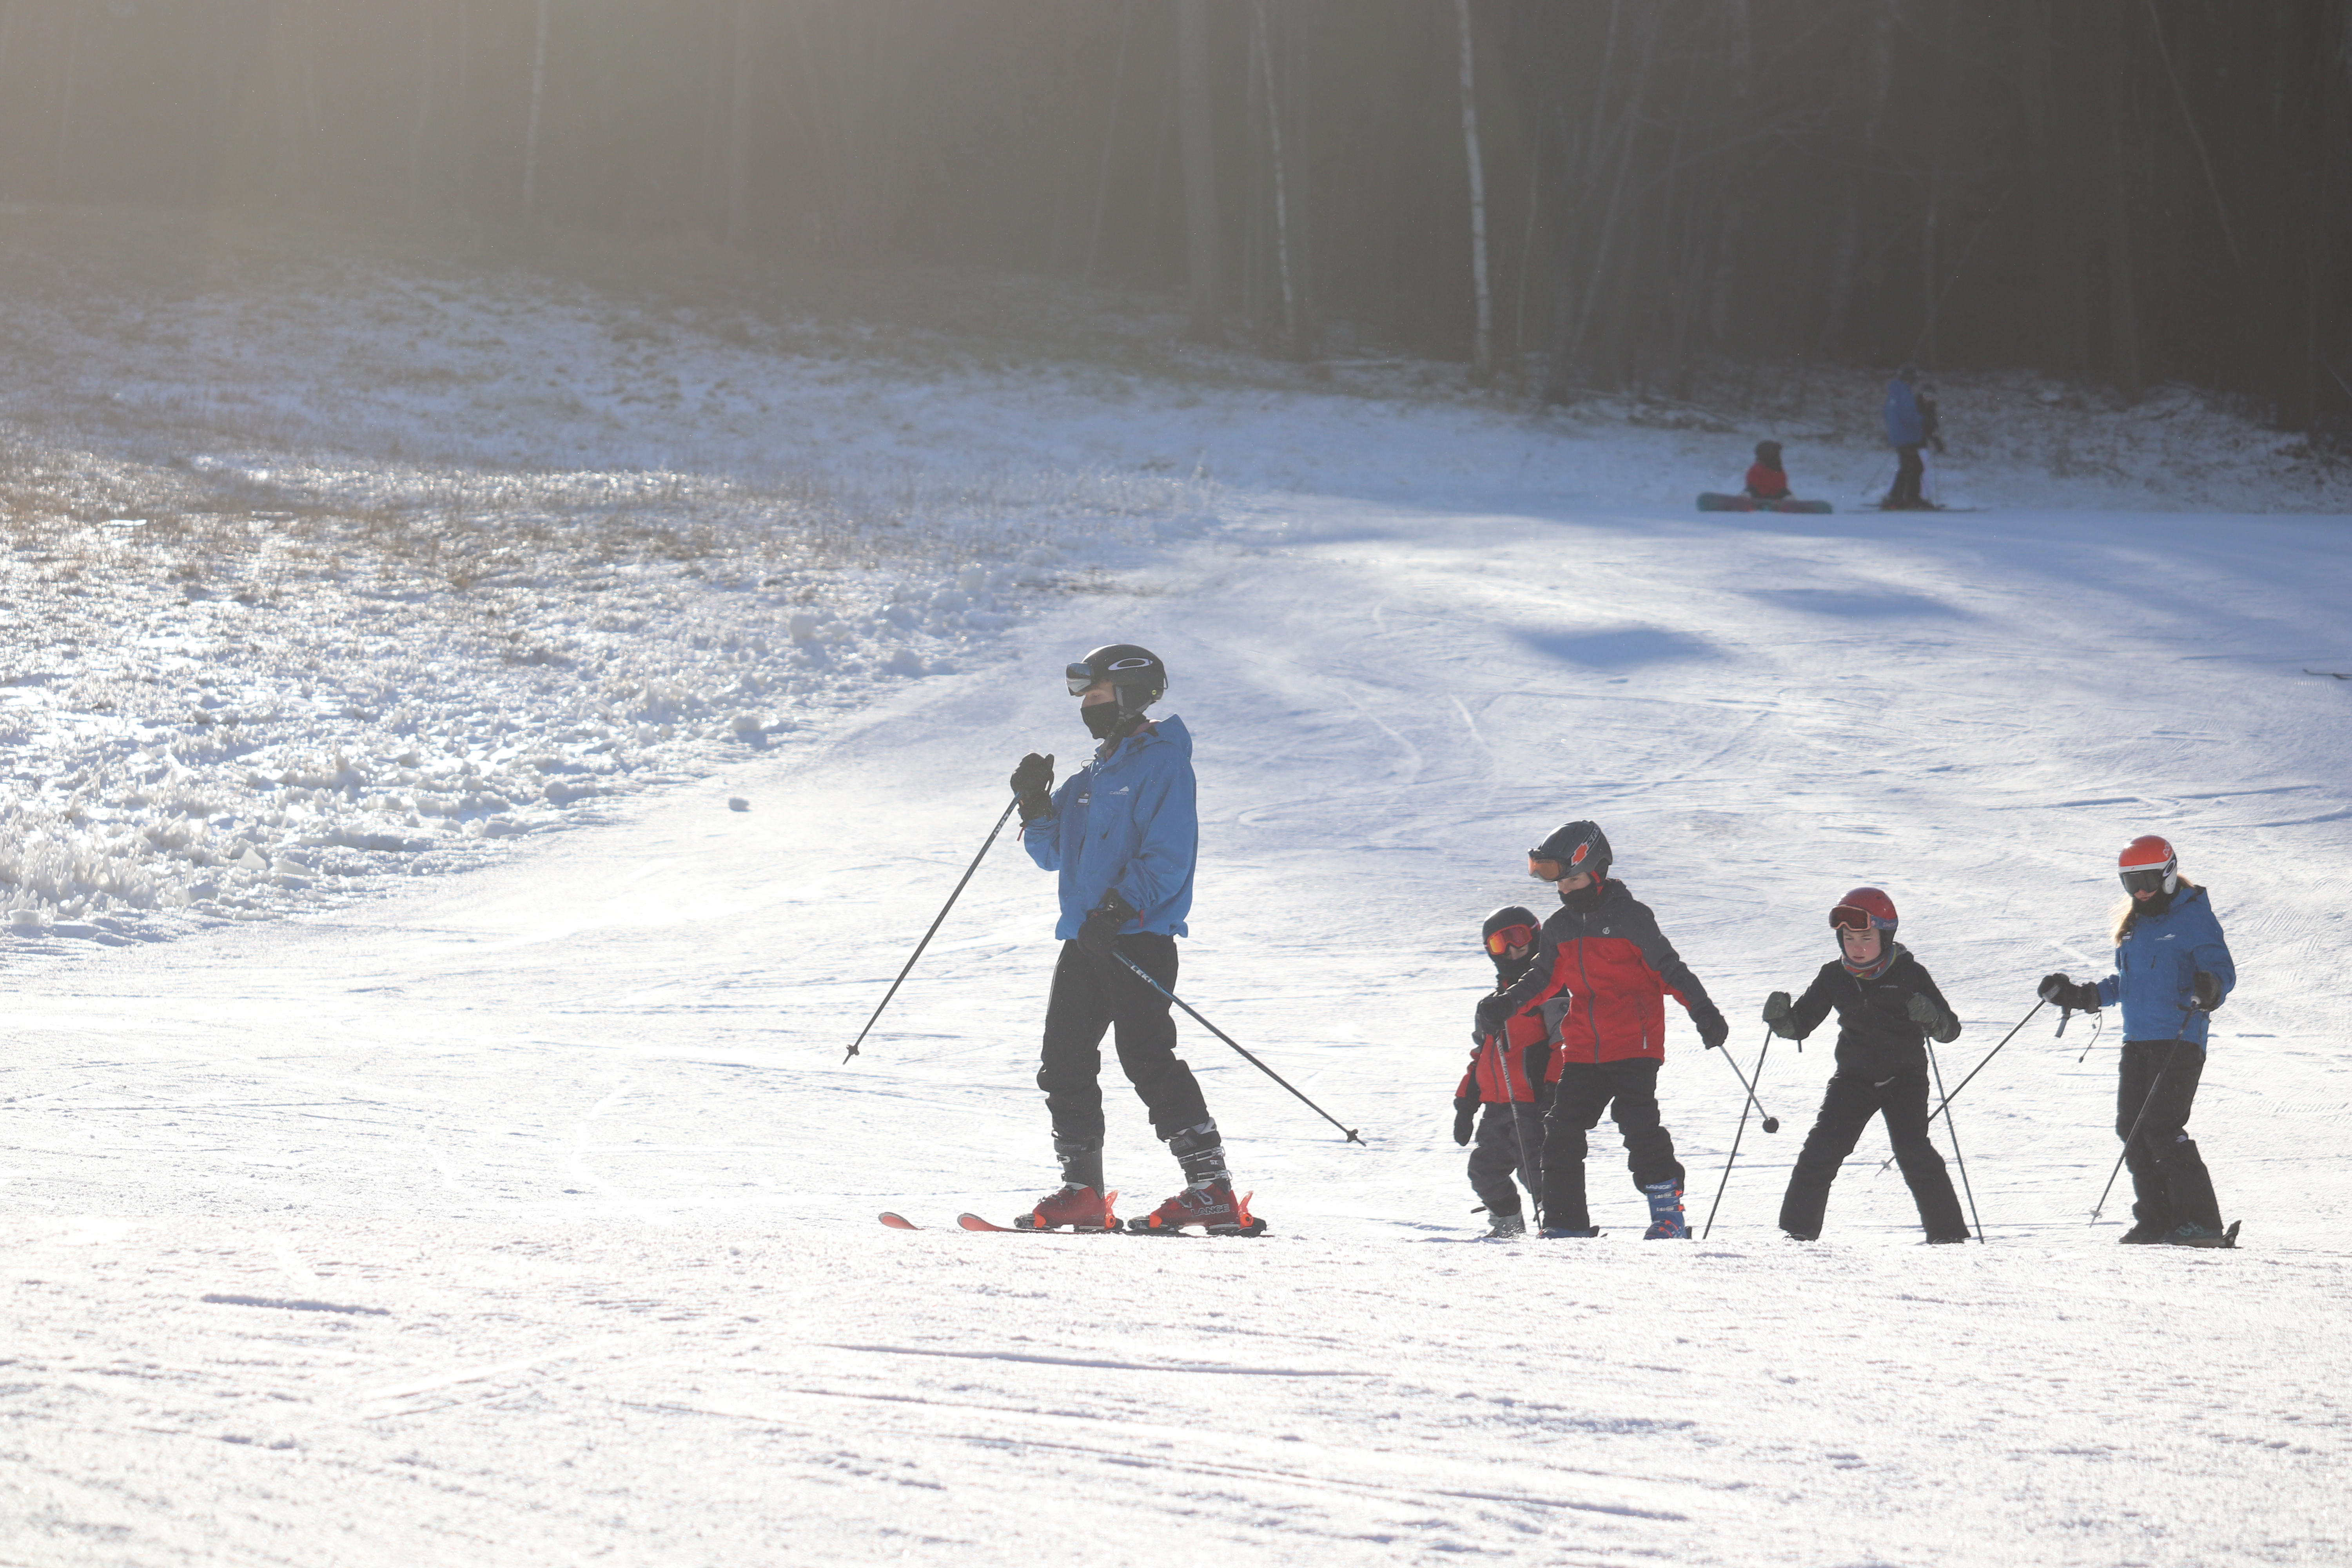 A ski instructor leading a group of young skiers at Catamount Ski Resort